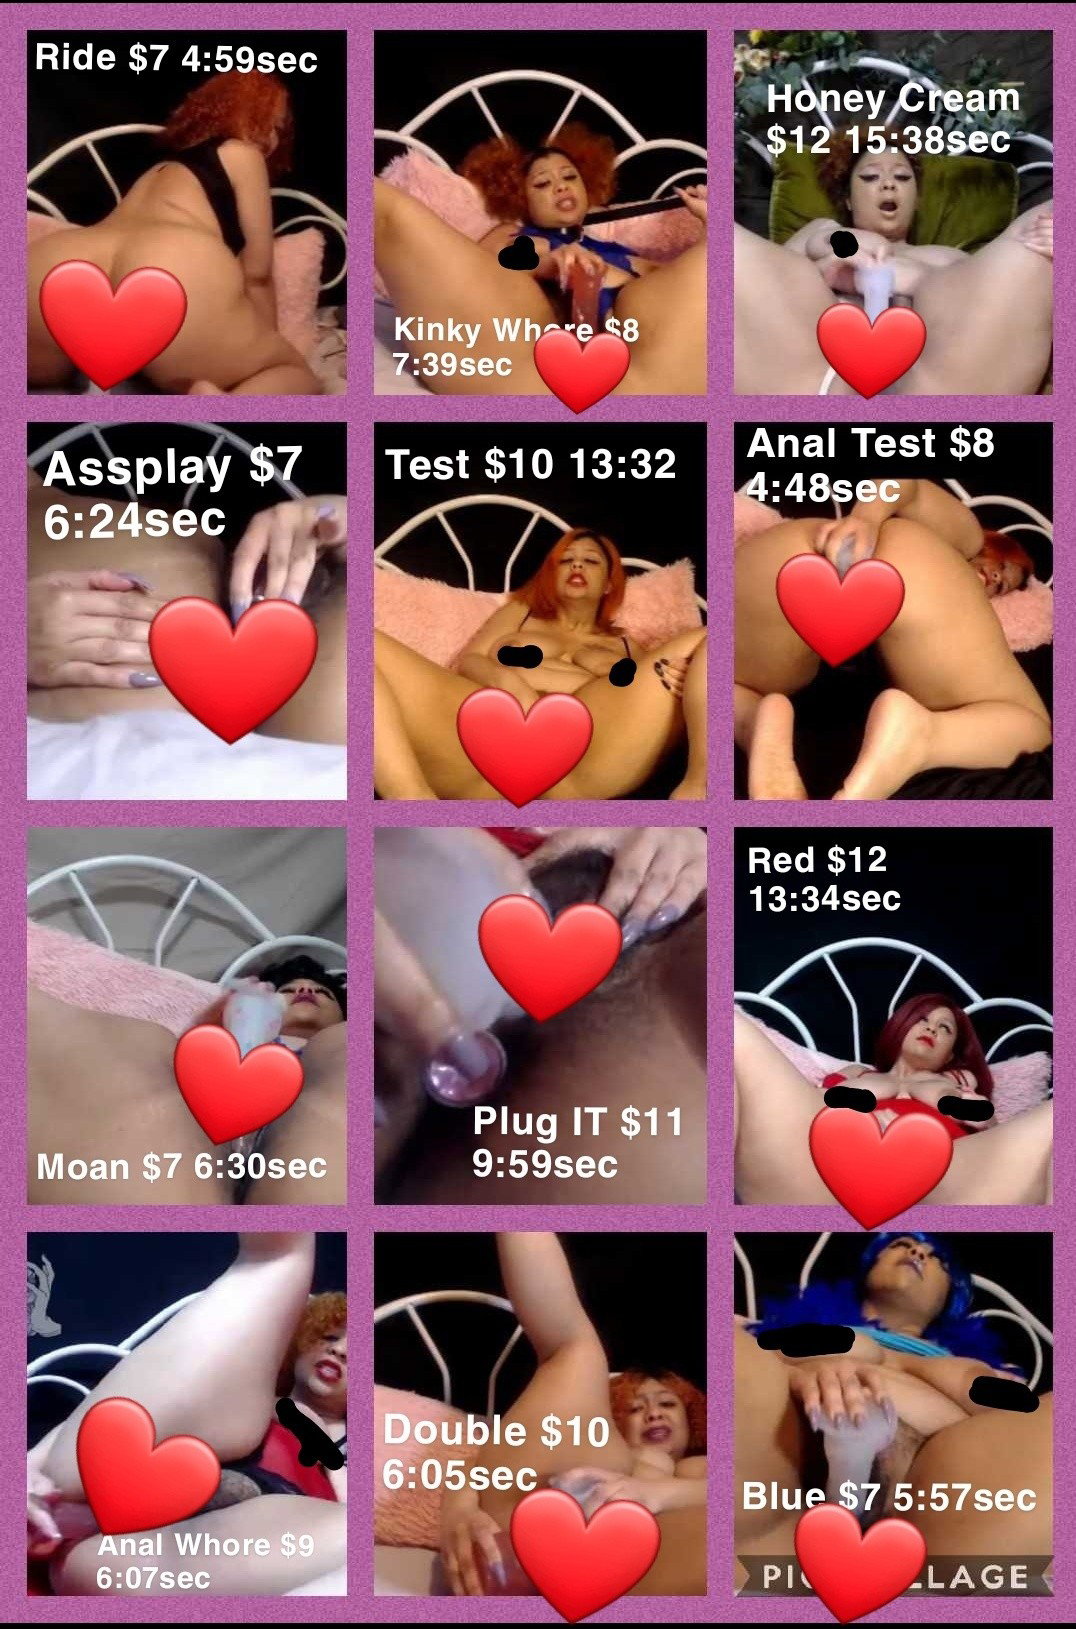 Photo by Mistresssiren1 with the username @Mistresssiren1, who is a star user,  May 12, 2020 at 8:15 AM and the text says 'All of my premium videos i have for sale 😘

Pick your poison 👄💦👅
DM me your choice after payment💅🏽 
$crystalsiren 
#SexSymbolOfTheGalaxy #Cyberhoe #EWhore #Creamer #Anal #Slut #HairyPussy #Thick #BigTits'